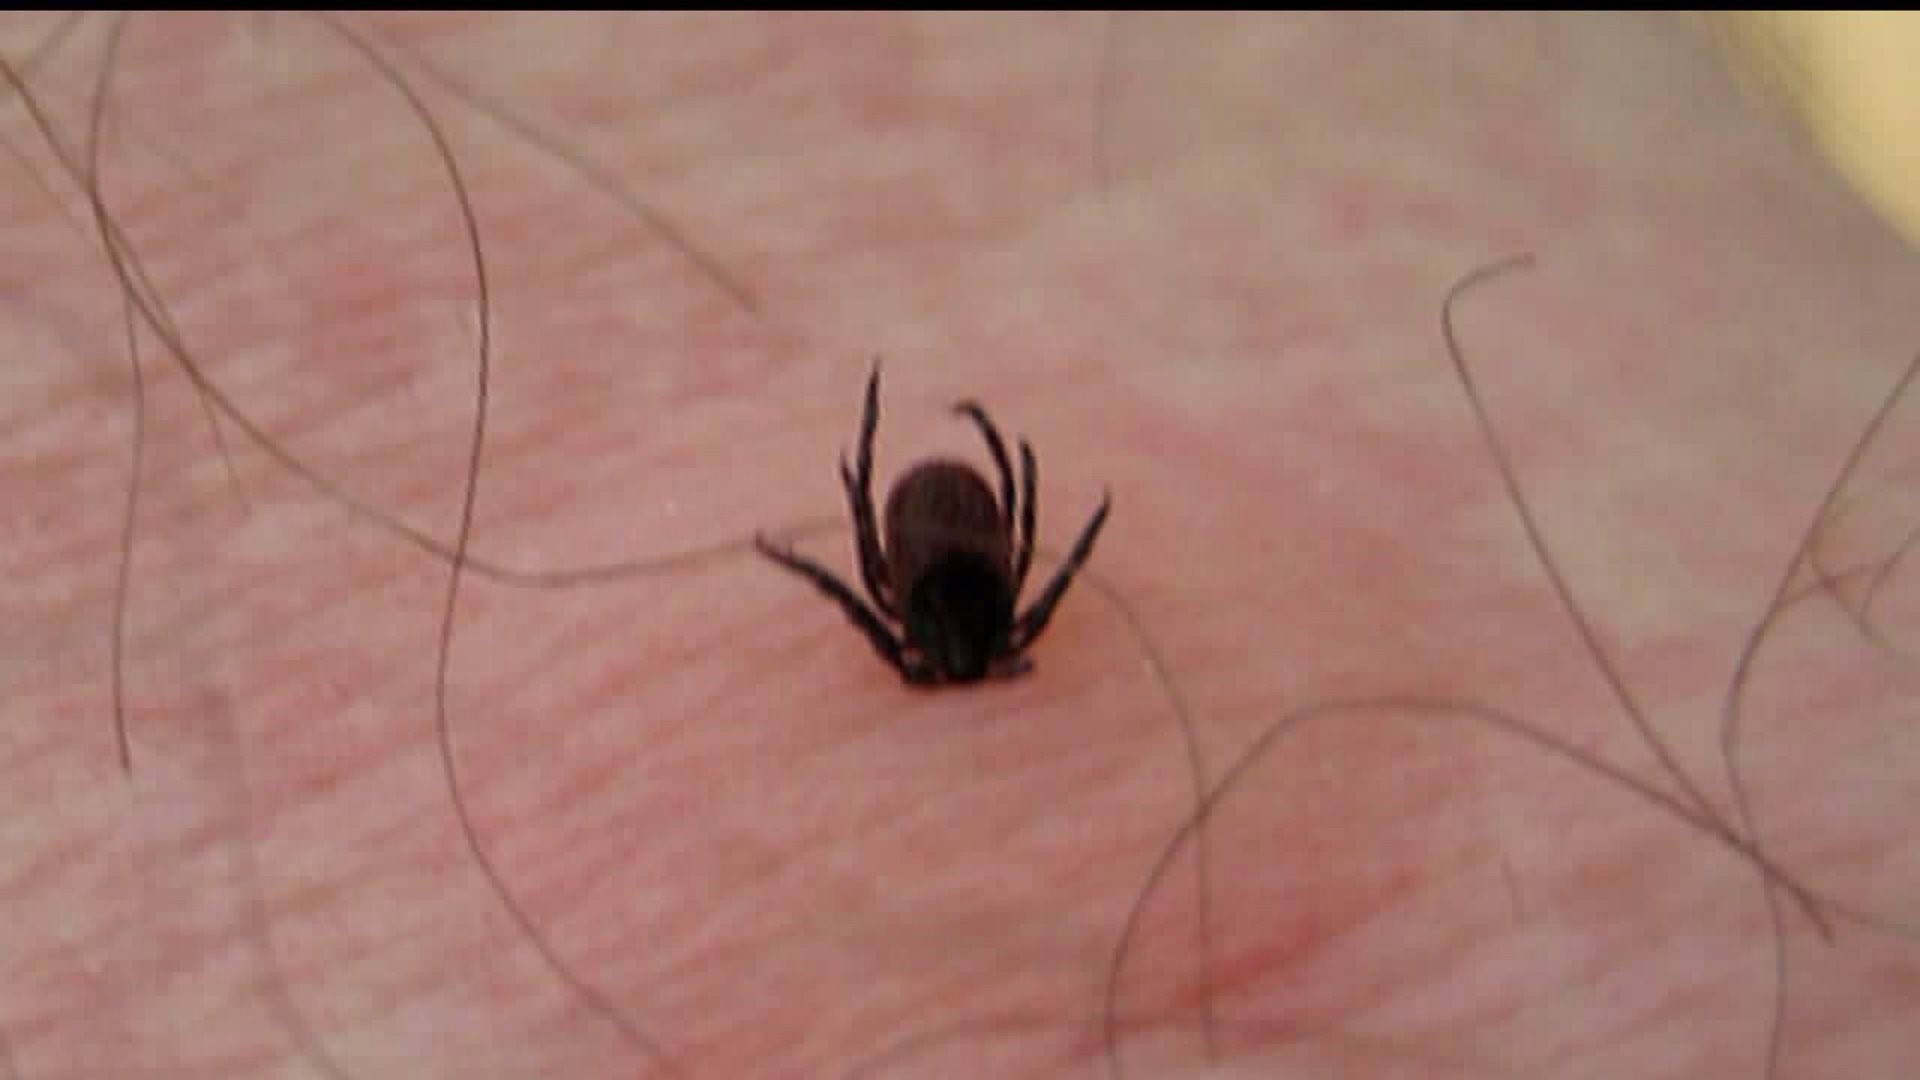 PA lyme disease cases high